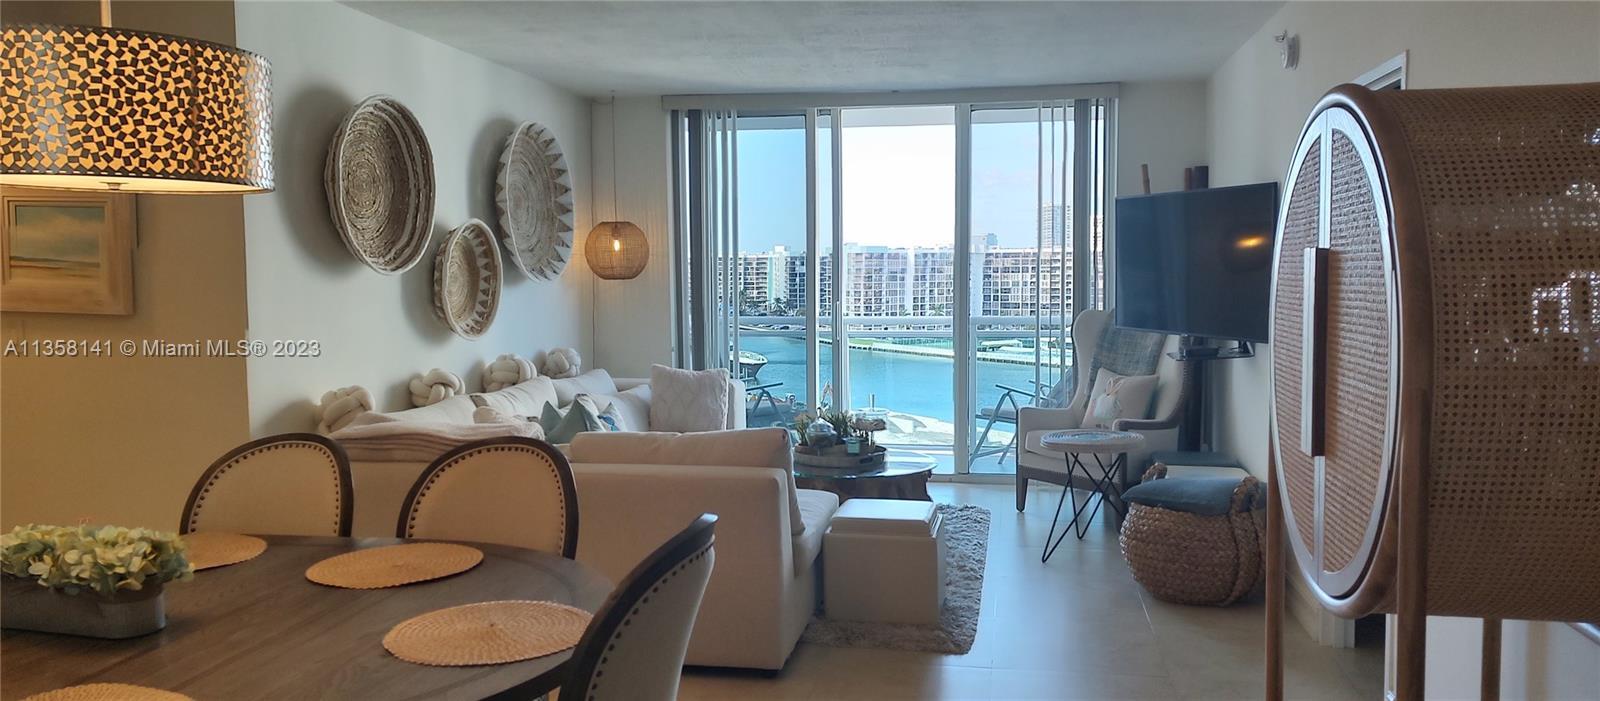 This 2 bed 2 bath unit is a Corner unit with beautiful intracoastal views.  It features a modern kit